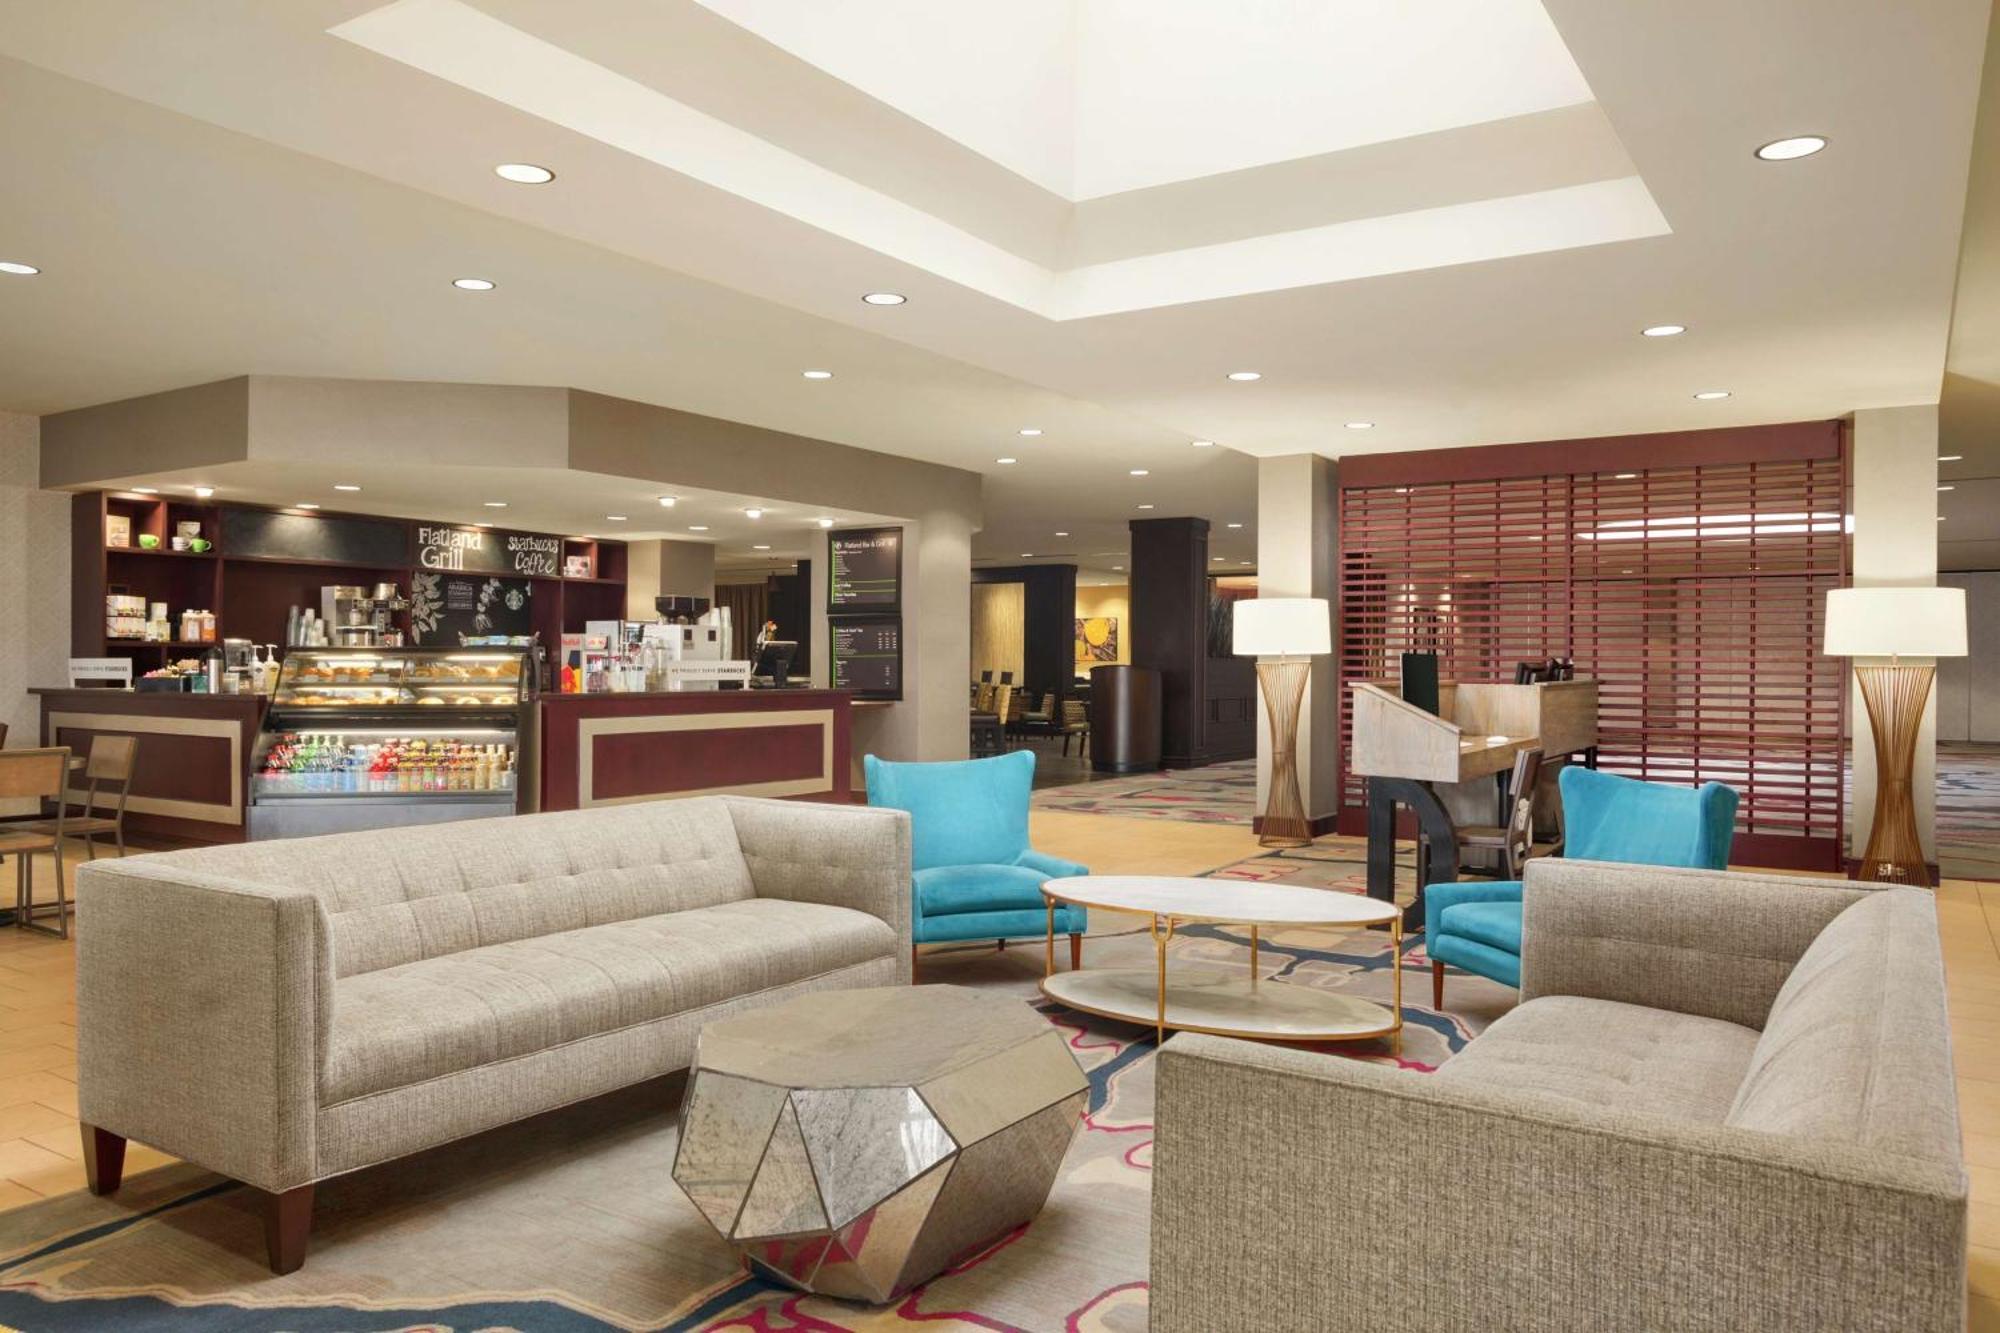 Doubletree By Hilton Dfw Airport North Hotel Irving Bagian luar foto